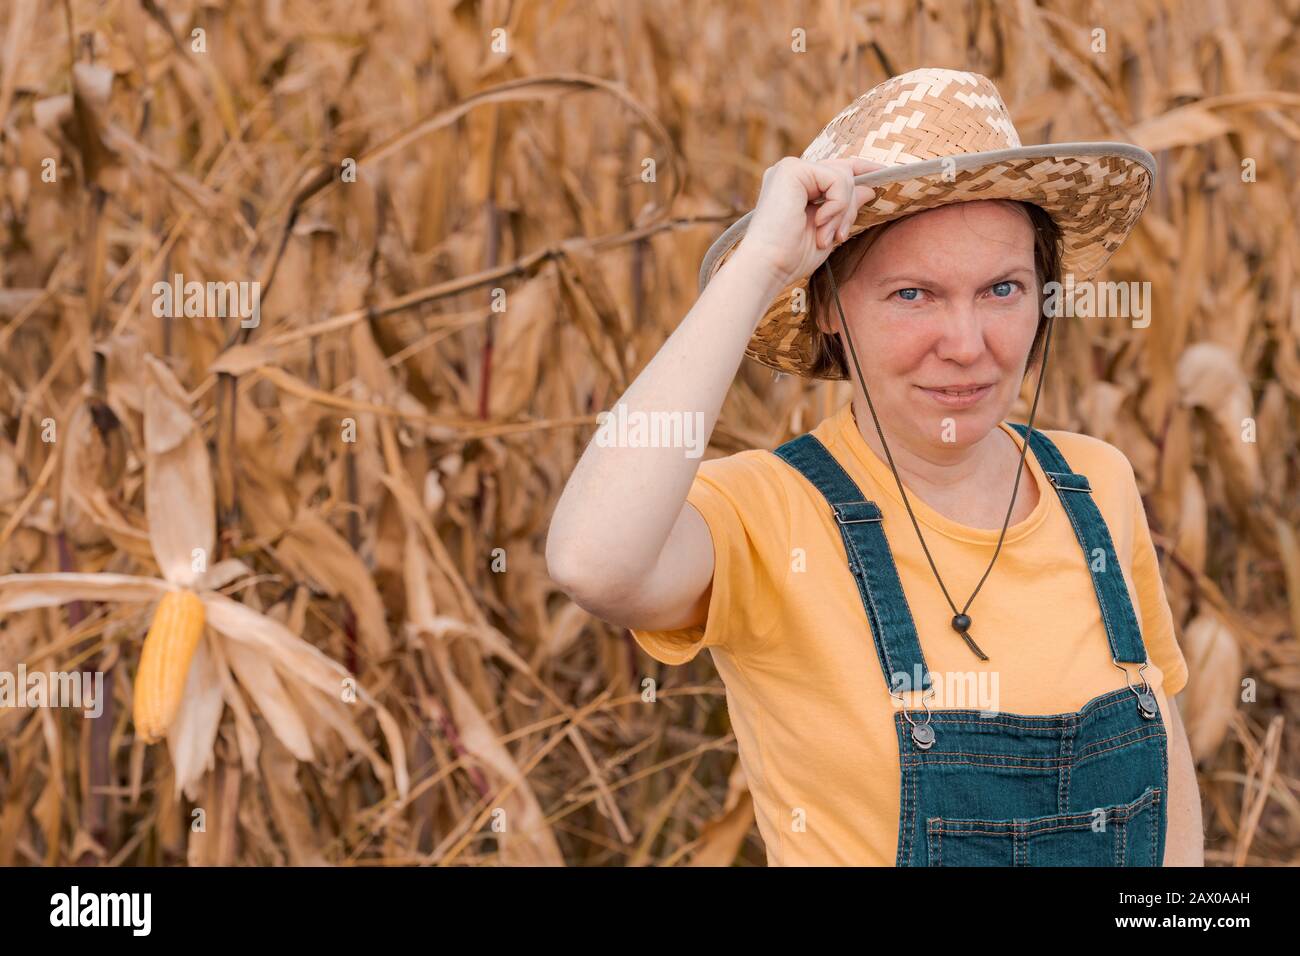 Farm Overalls Woman Hi-res Stock Photography And Images, 48% OFF